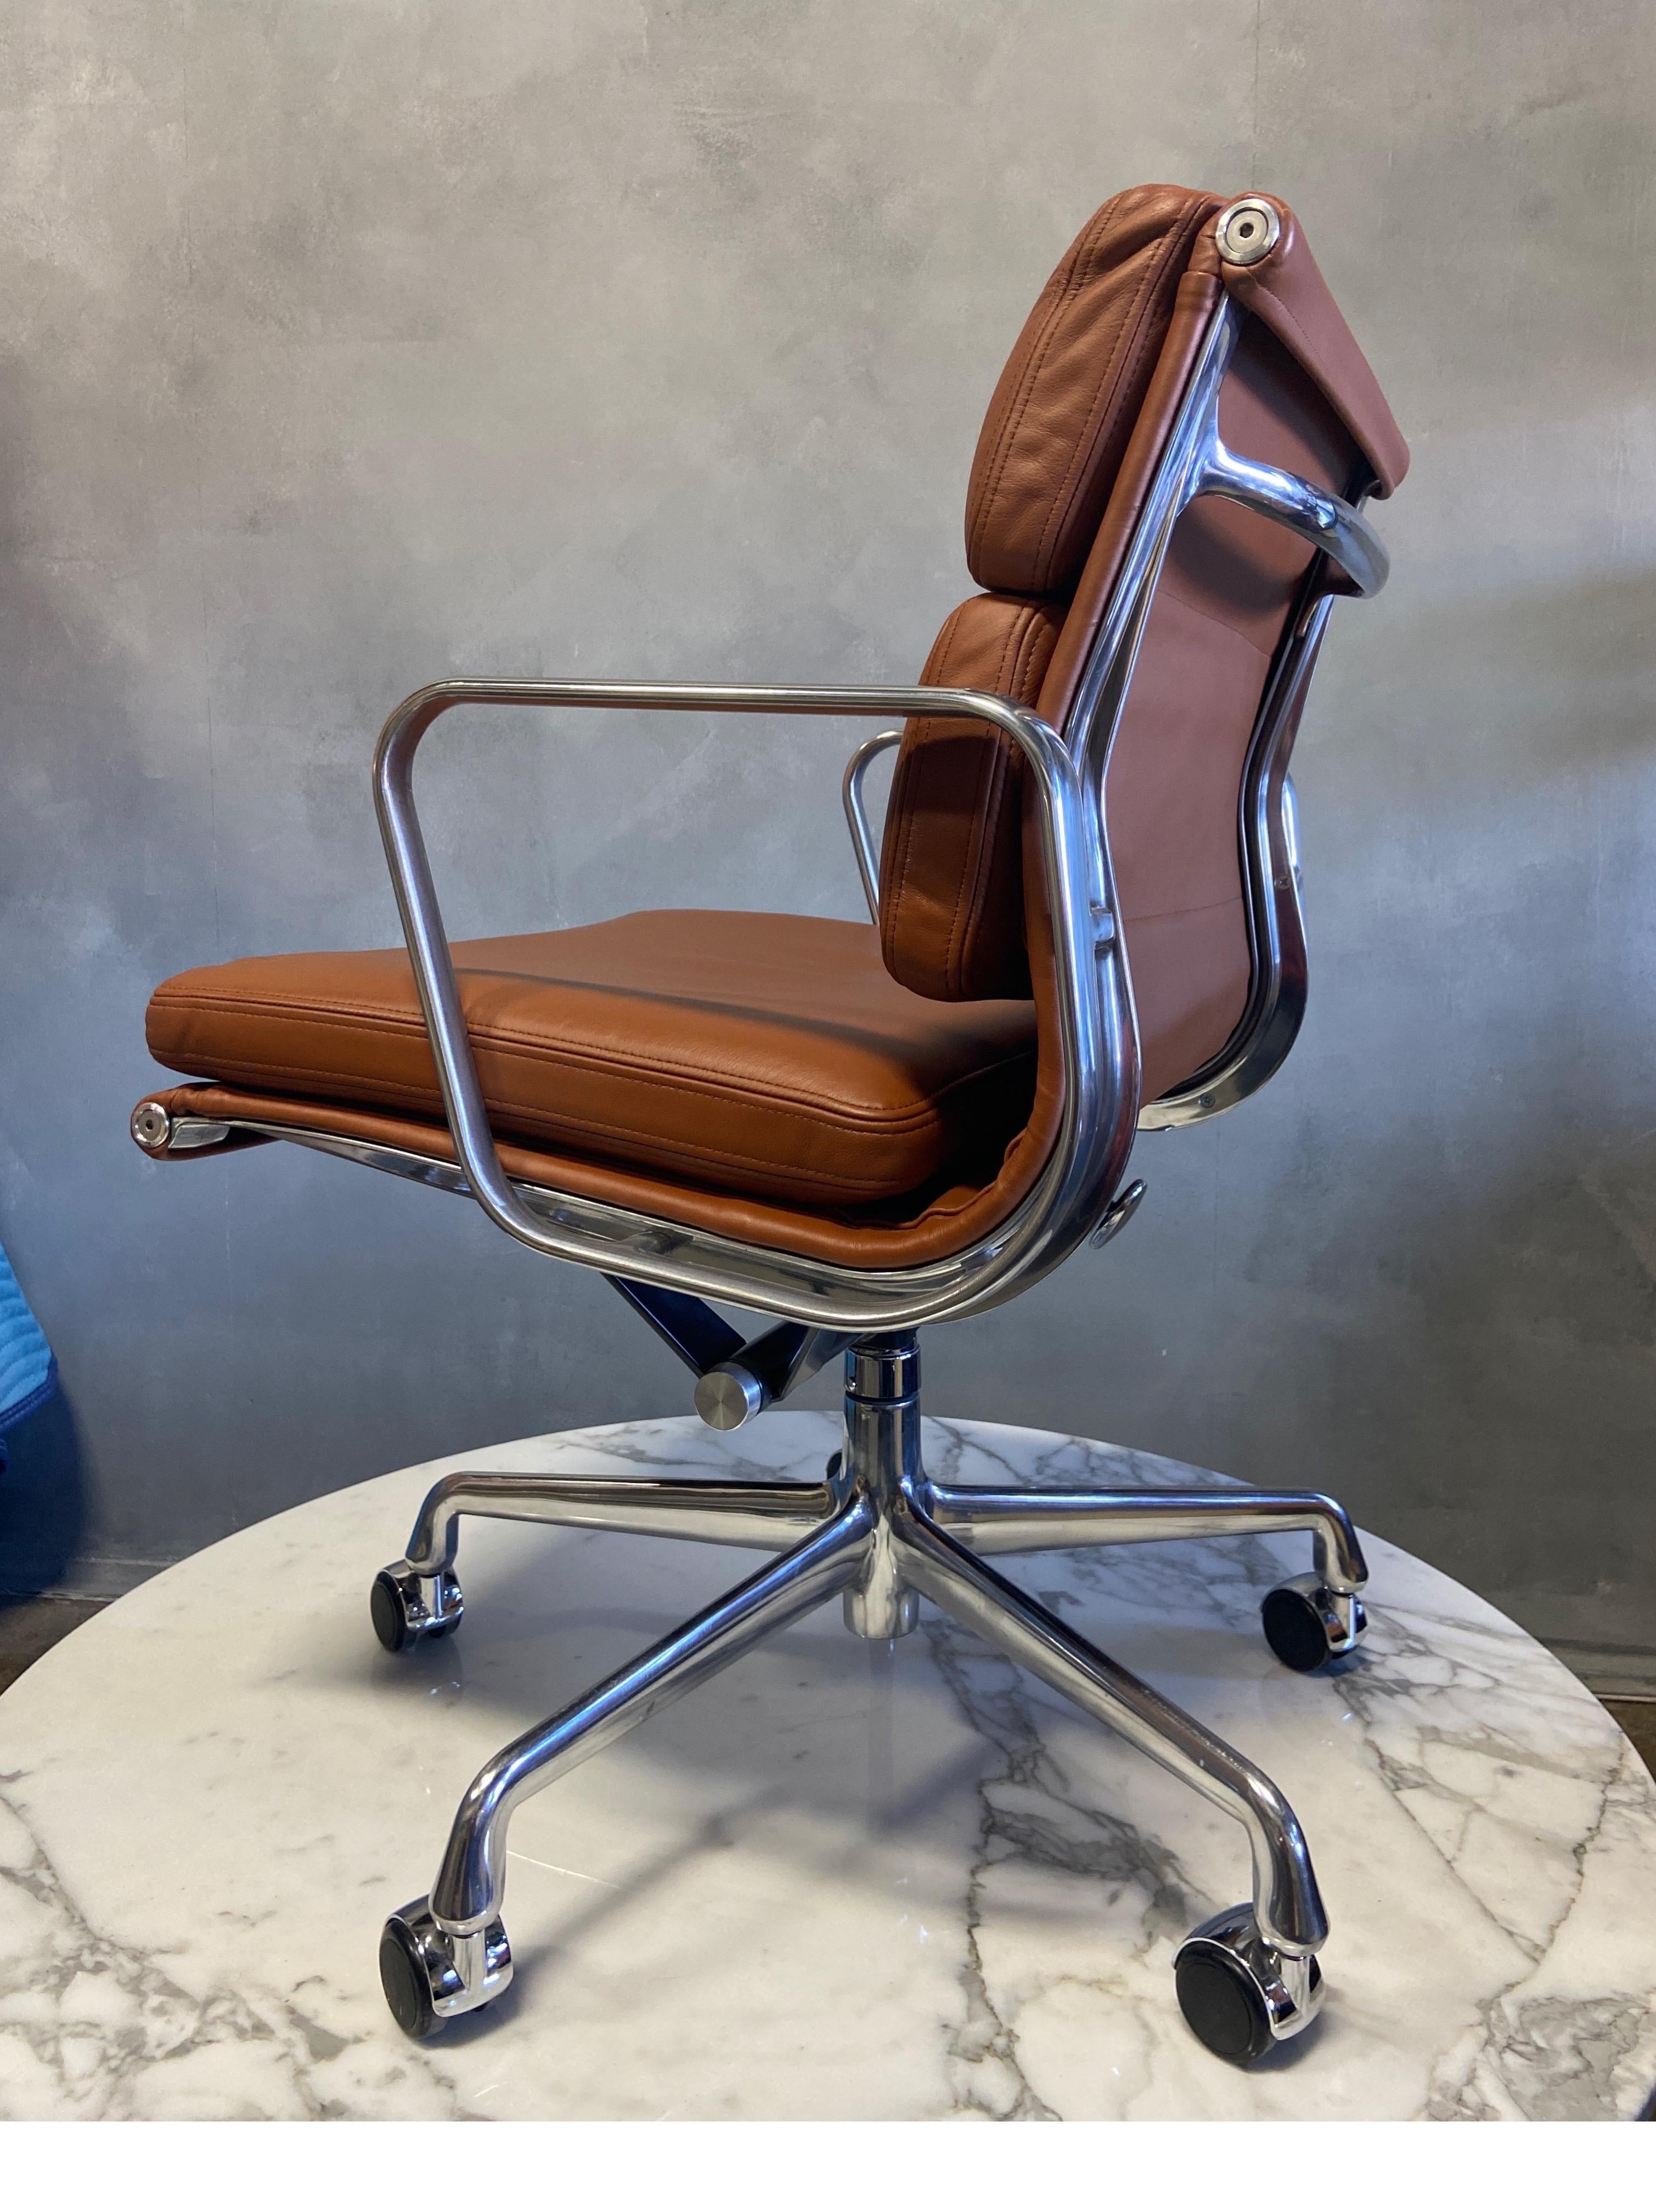 For your consideration is this authentic Eames for Herman Miller vintage soft pad chairs in brown leather. Adjustable tilt and height on a 5 star base. These authentic vintage examples are icons of Mid-Century Modern design. These chairs are part of